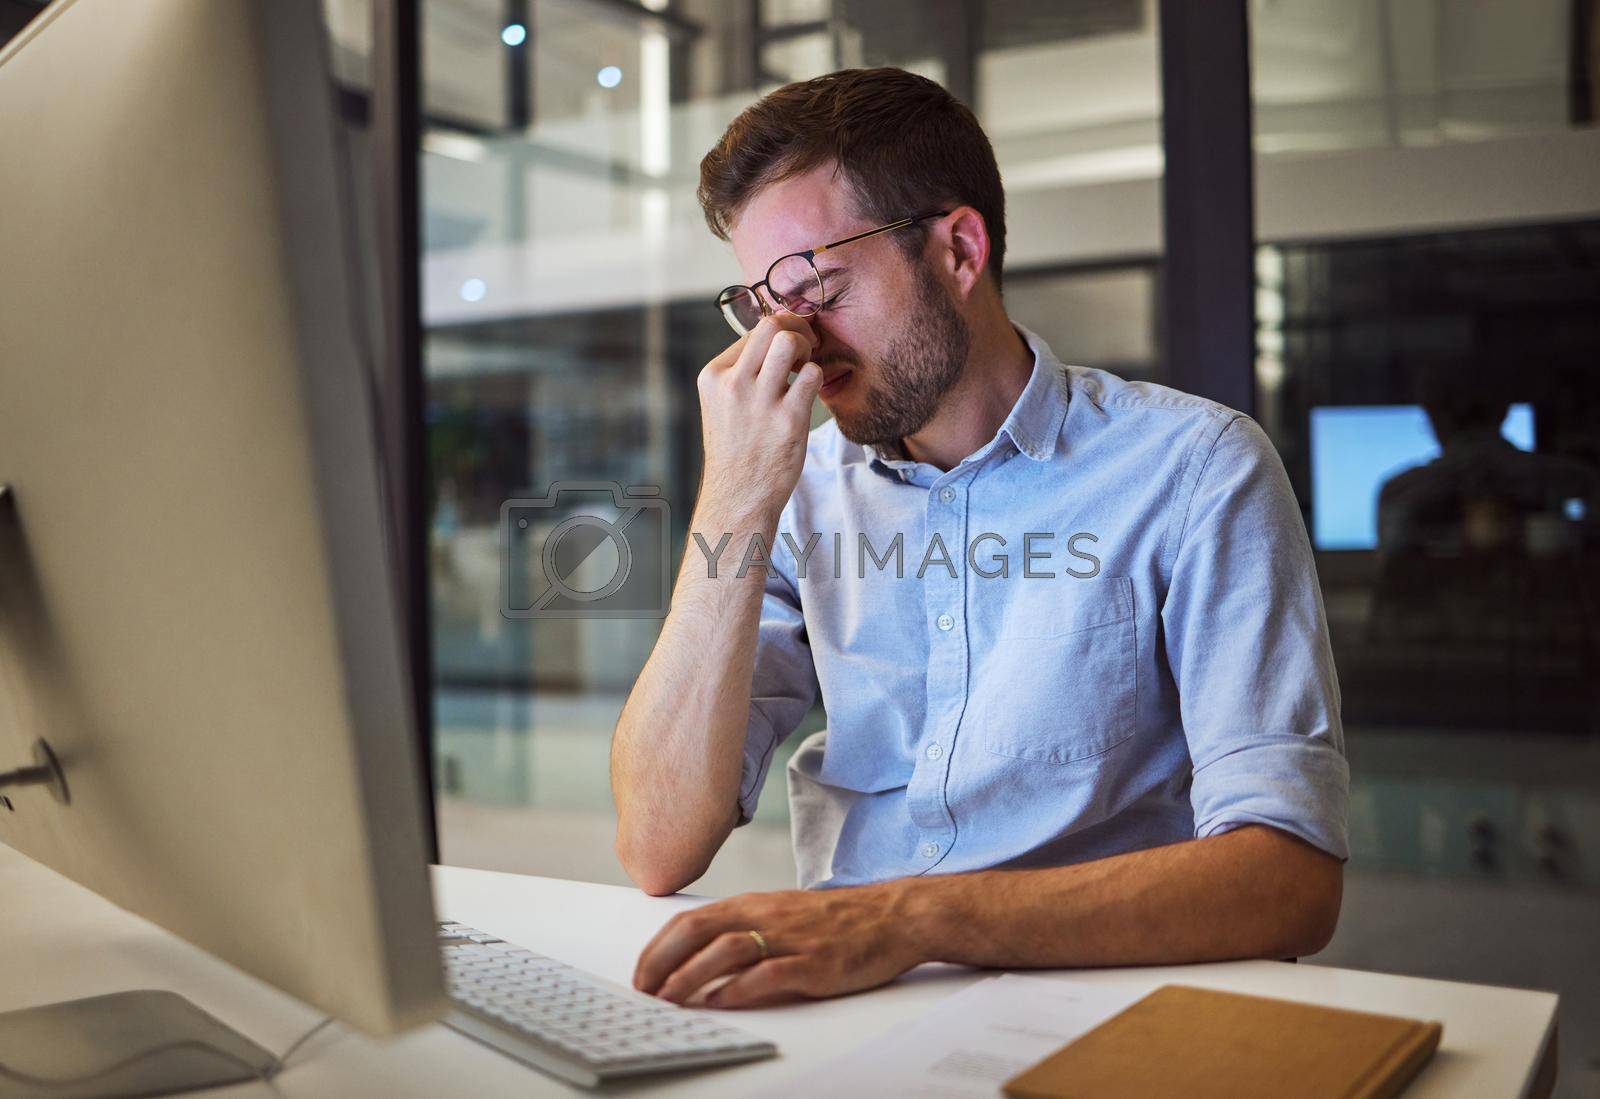 Royalty free image of Night business, stress and tired man sitting at his computer desk with headache, depression and burnout from work pressure. Stressed, mental health and depressed male working late in his office by YuriArcurs